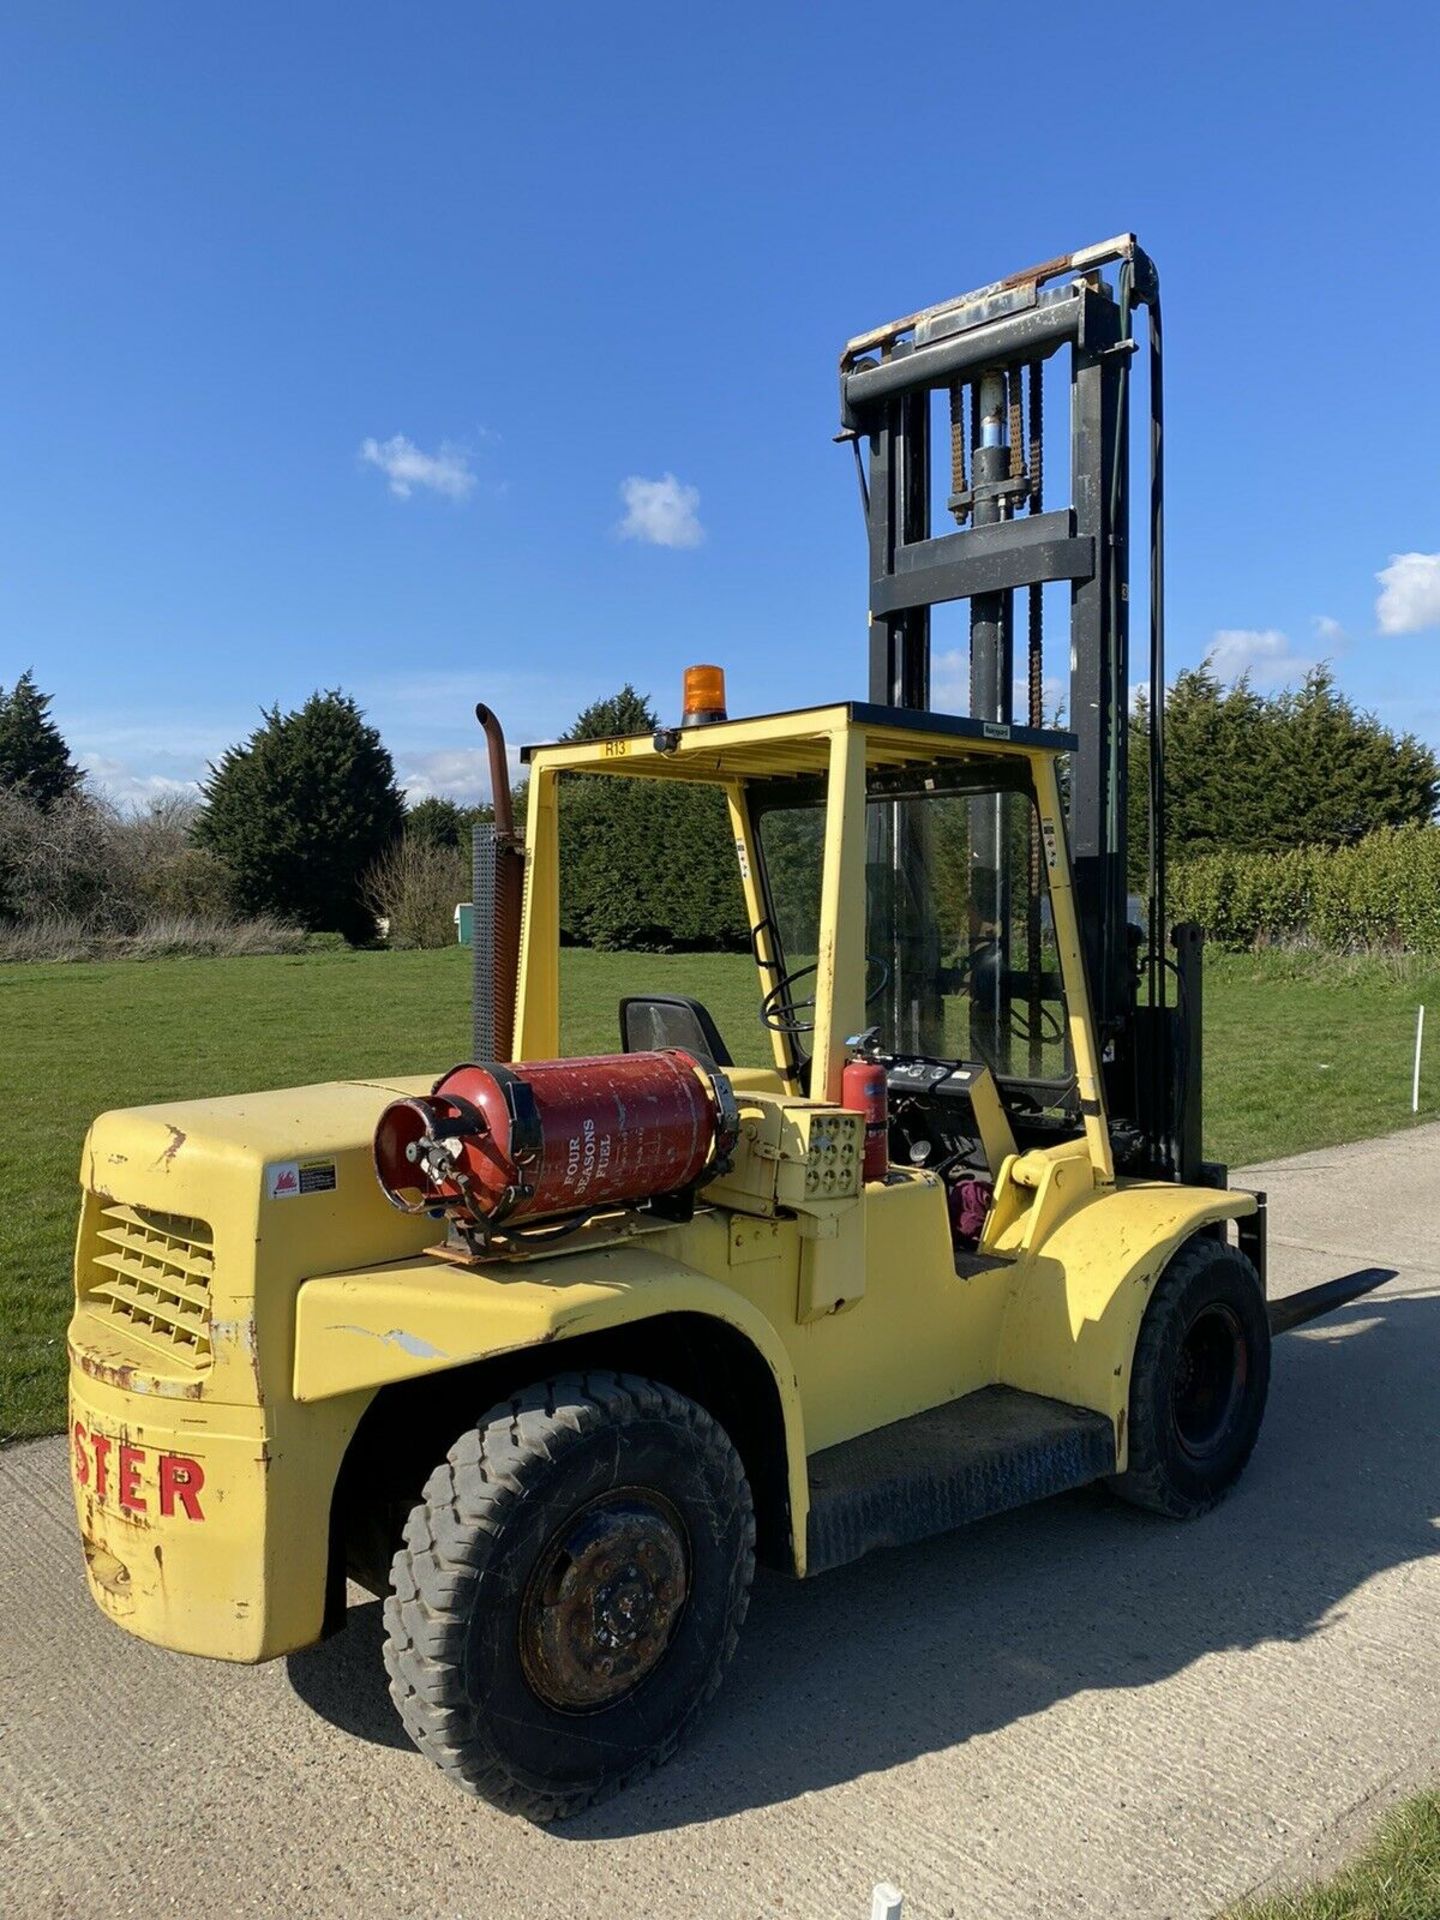 Hyster gas forklift truck - Image 6 of 7